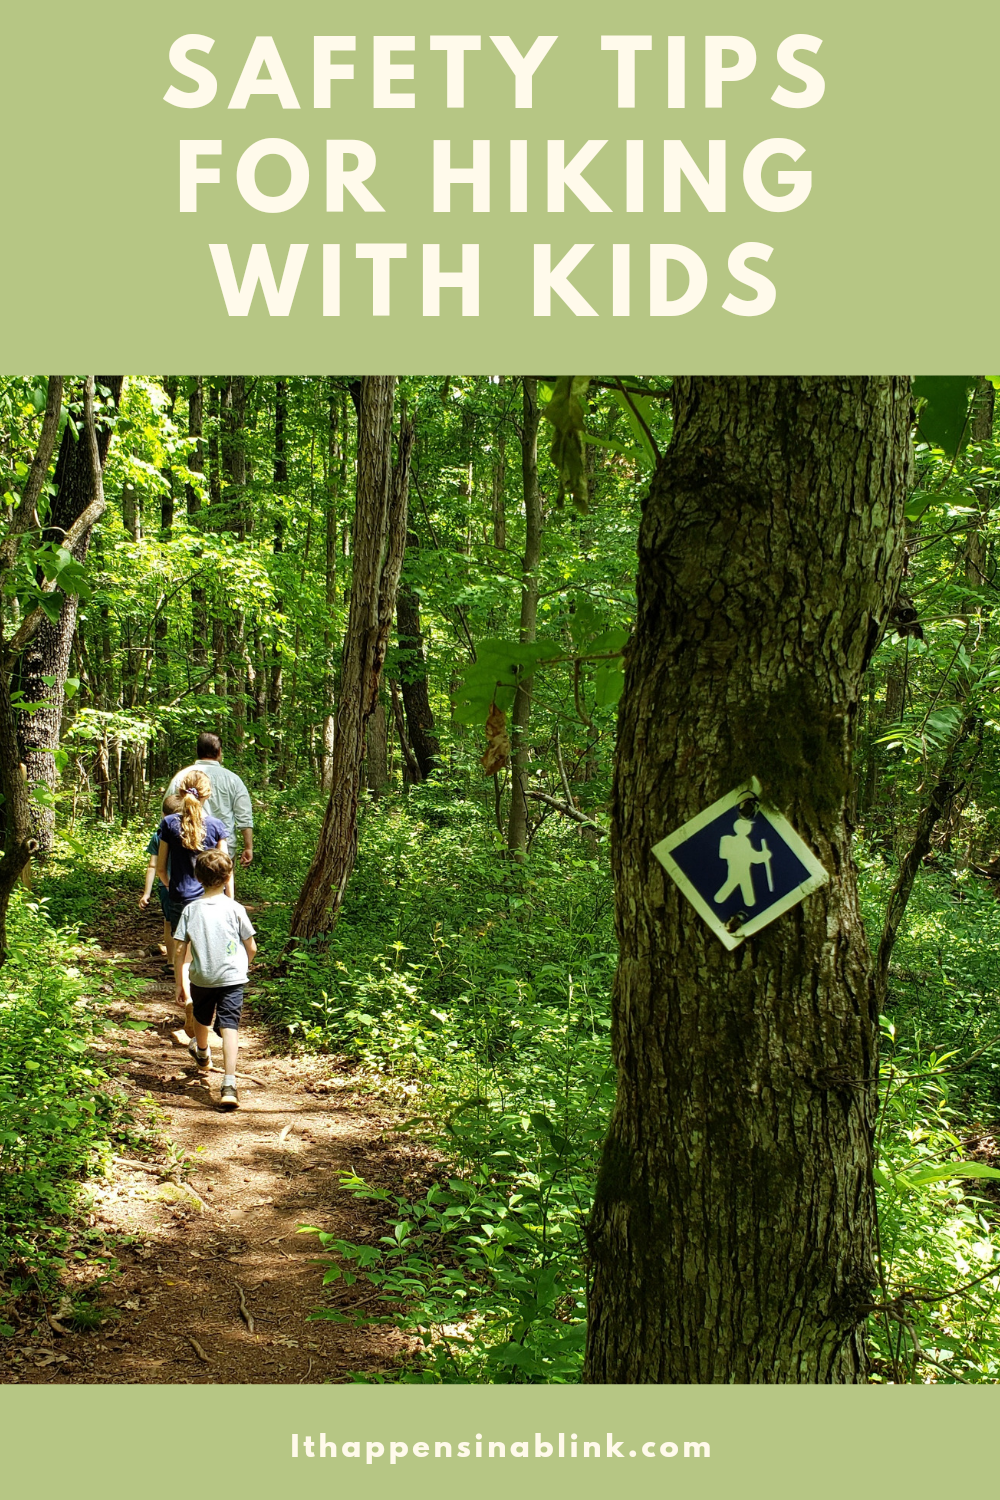 What Safety Precautions Should I Take When Hiking With Young Children?